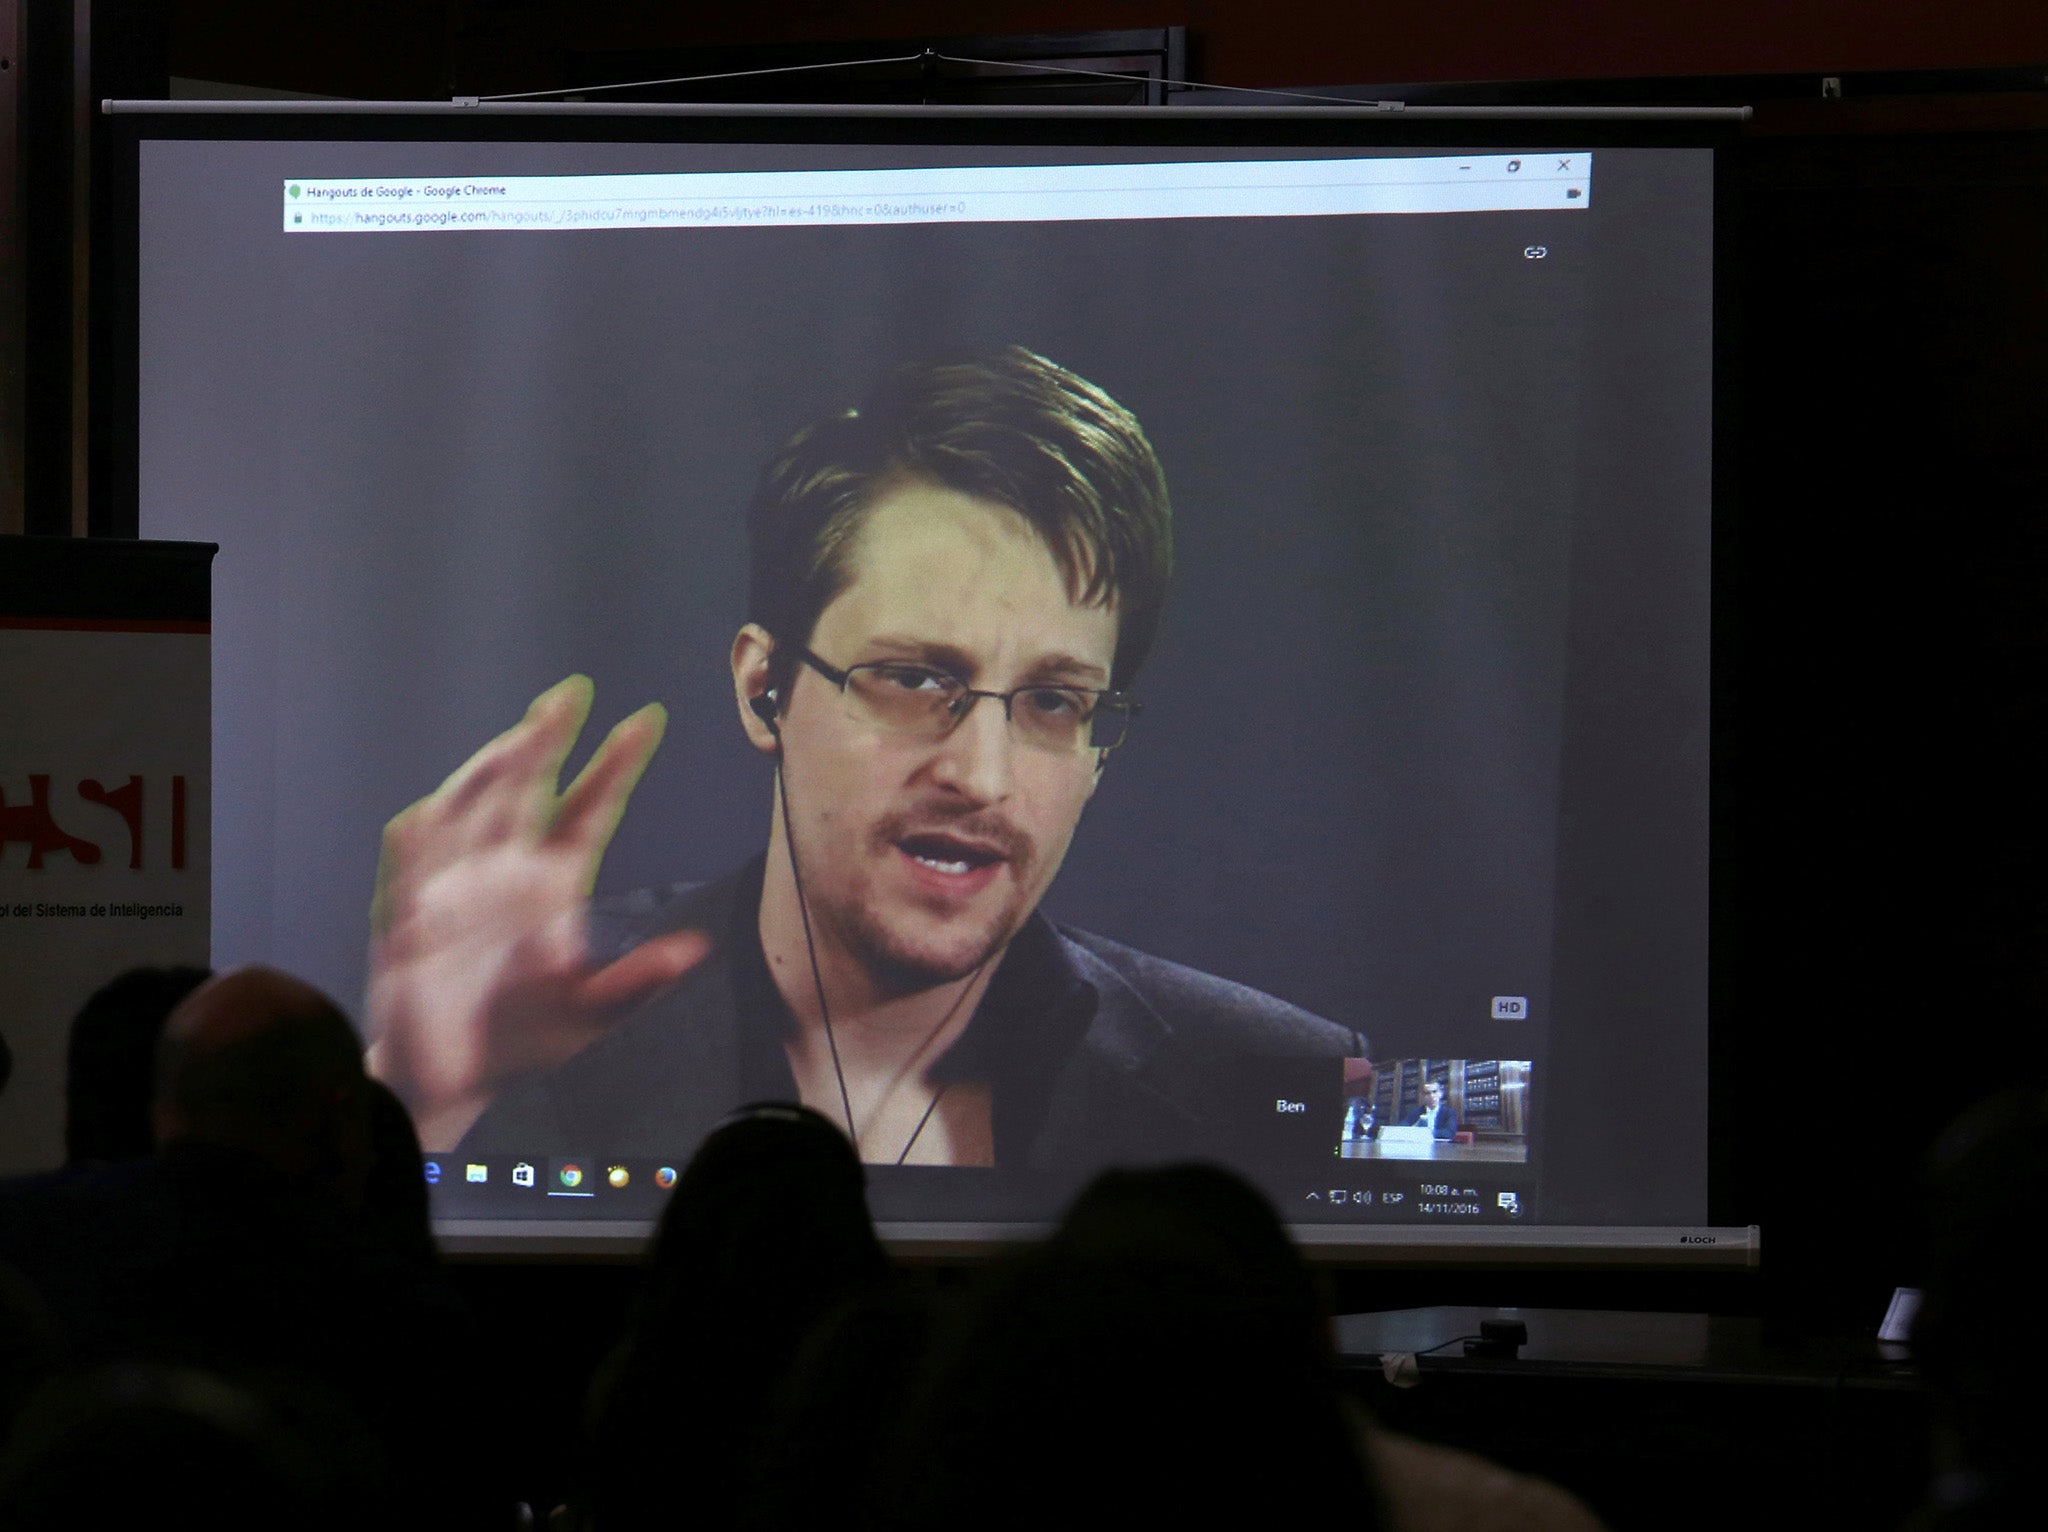 &#13;
The NSA whistleblower's revelations sparked increased tensions between allies &#13;